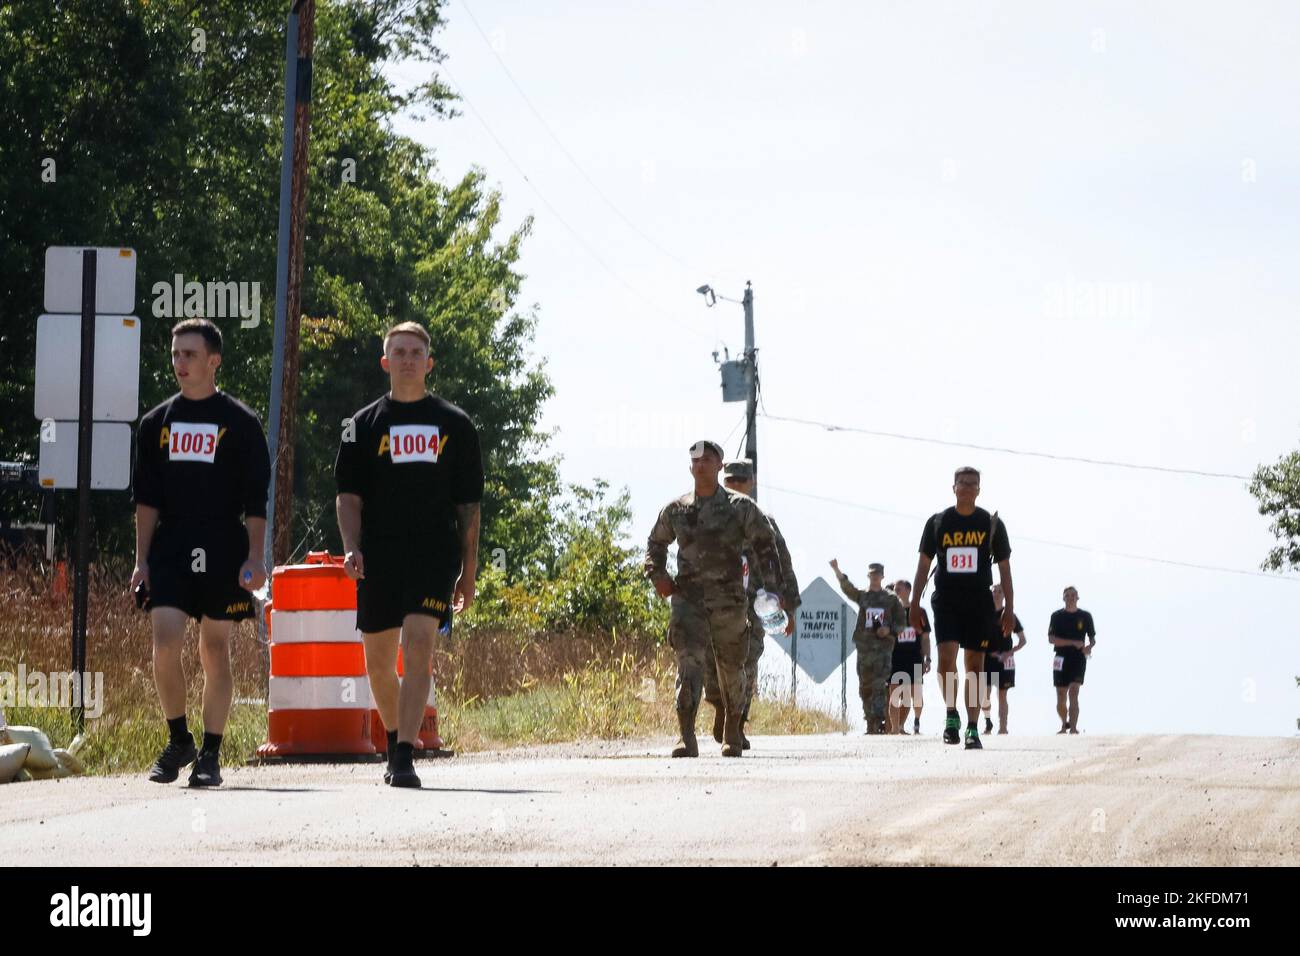 Members of the 1st Combined Arms Battalion, 194th Armor Regiment participated in the annual Bataan Memorial March, September 10, 2022. The half marathon event was held near the Brainerd Training and Community Center with participants walking, rucking or running in remembrance of the Bataan Death March. (Minnesota National Guard photo by Staff Sgt. Mahsima Alkamooneh) Stock Photo